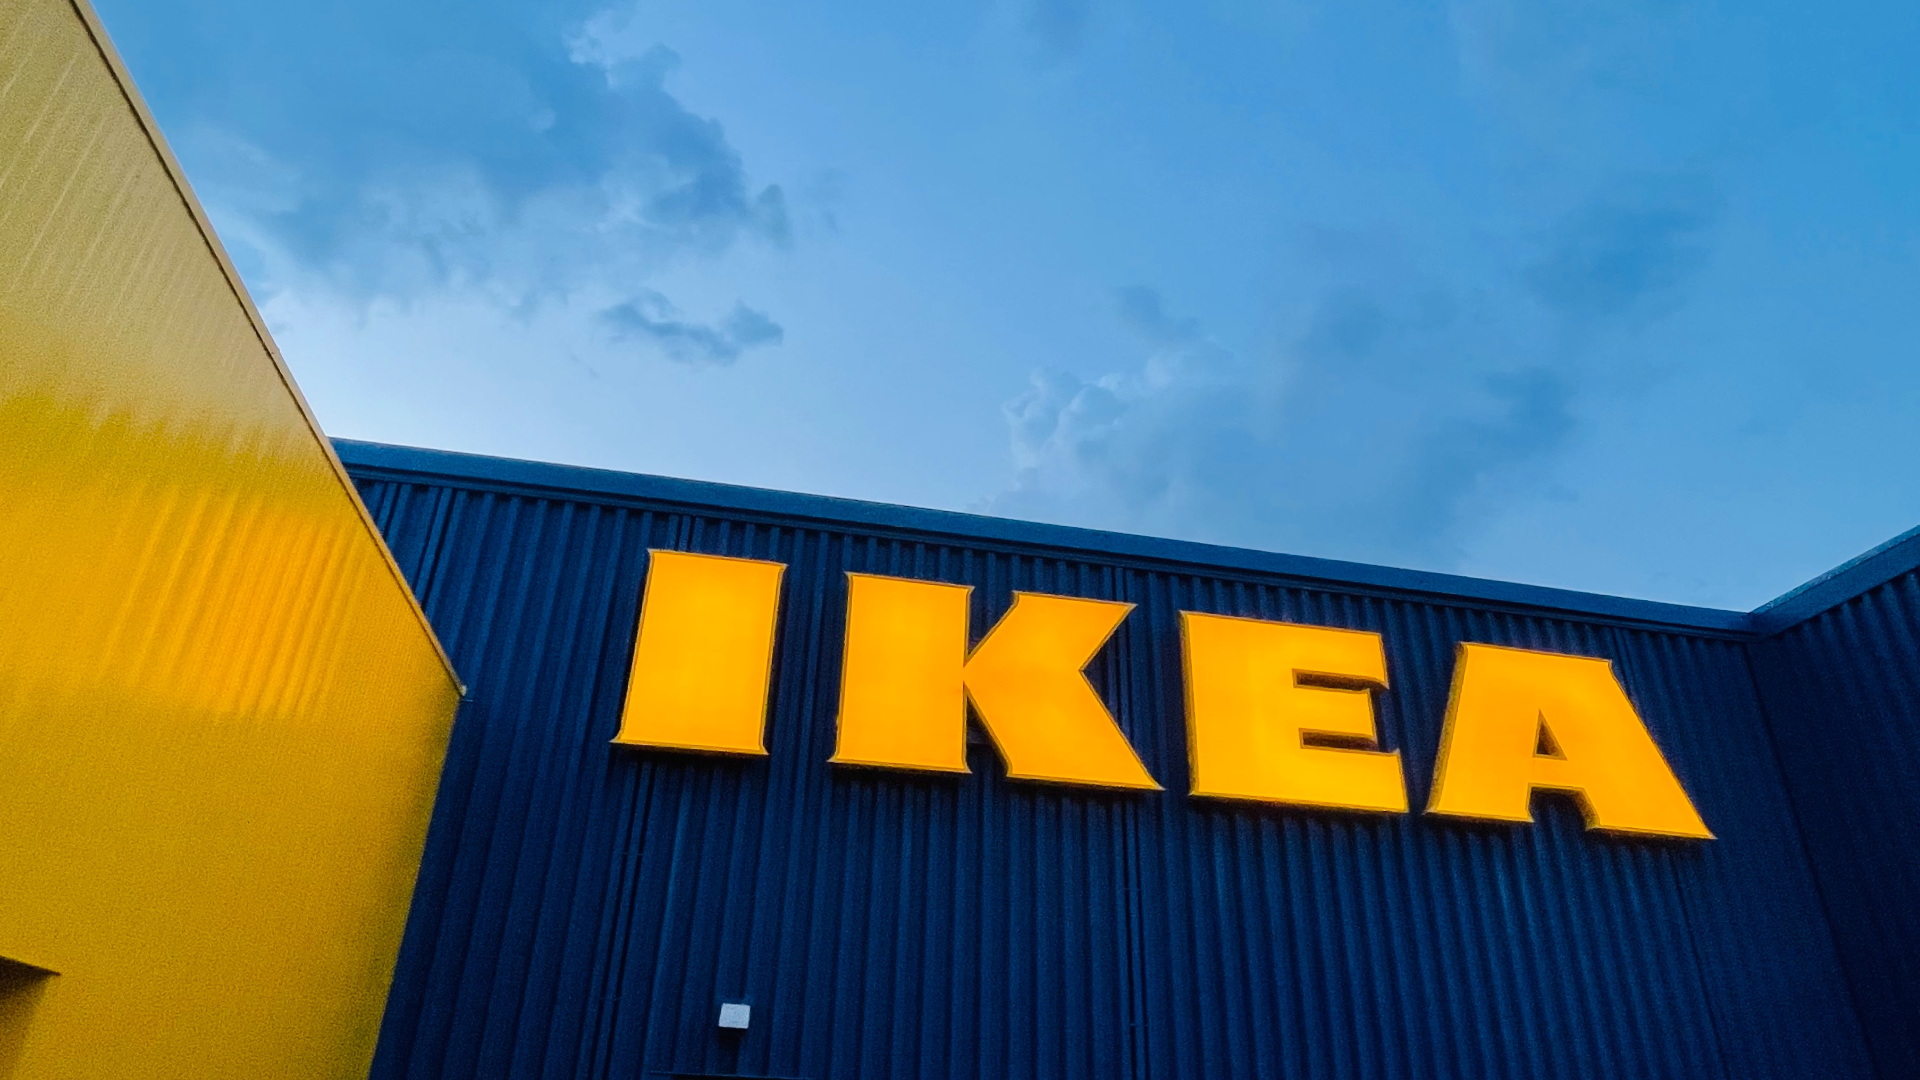 IKEA to start selling solar panels in American stores